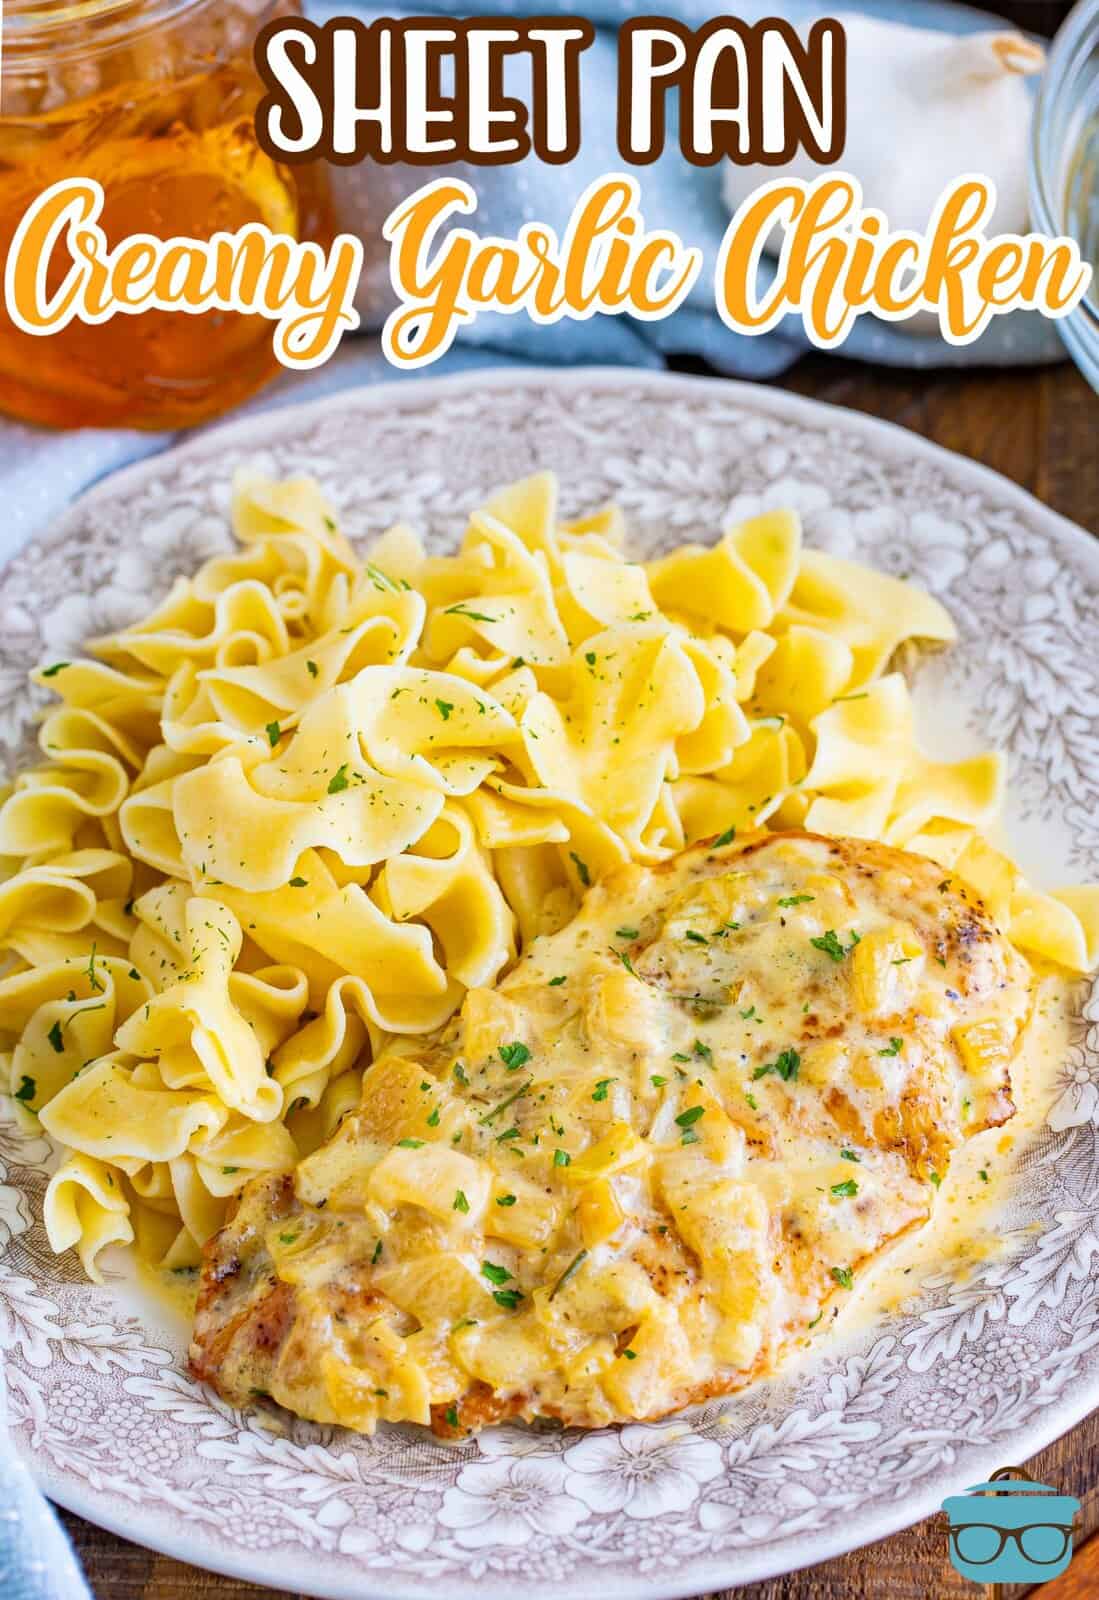 A bed of pasta and a piece of Creamy Garlic Chicken.